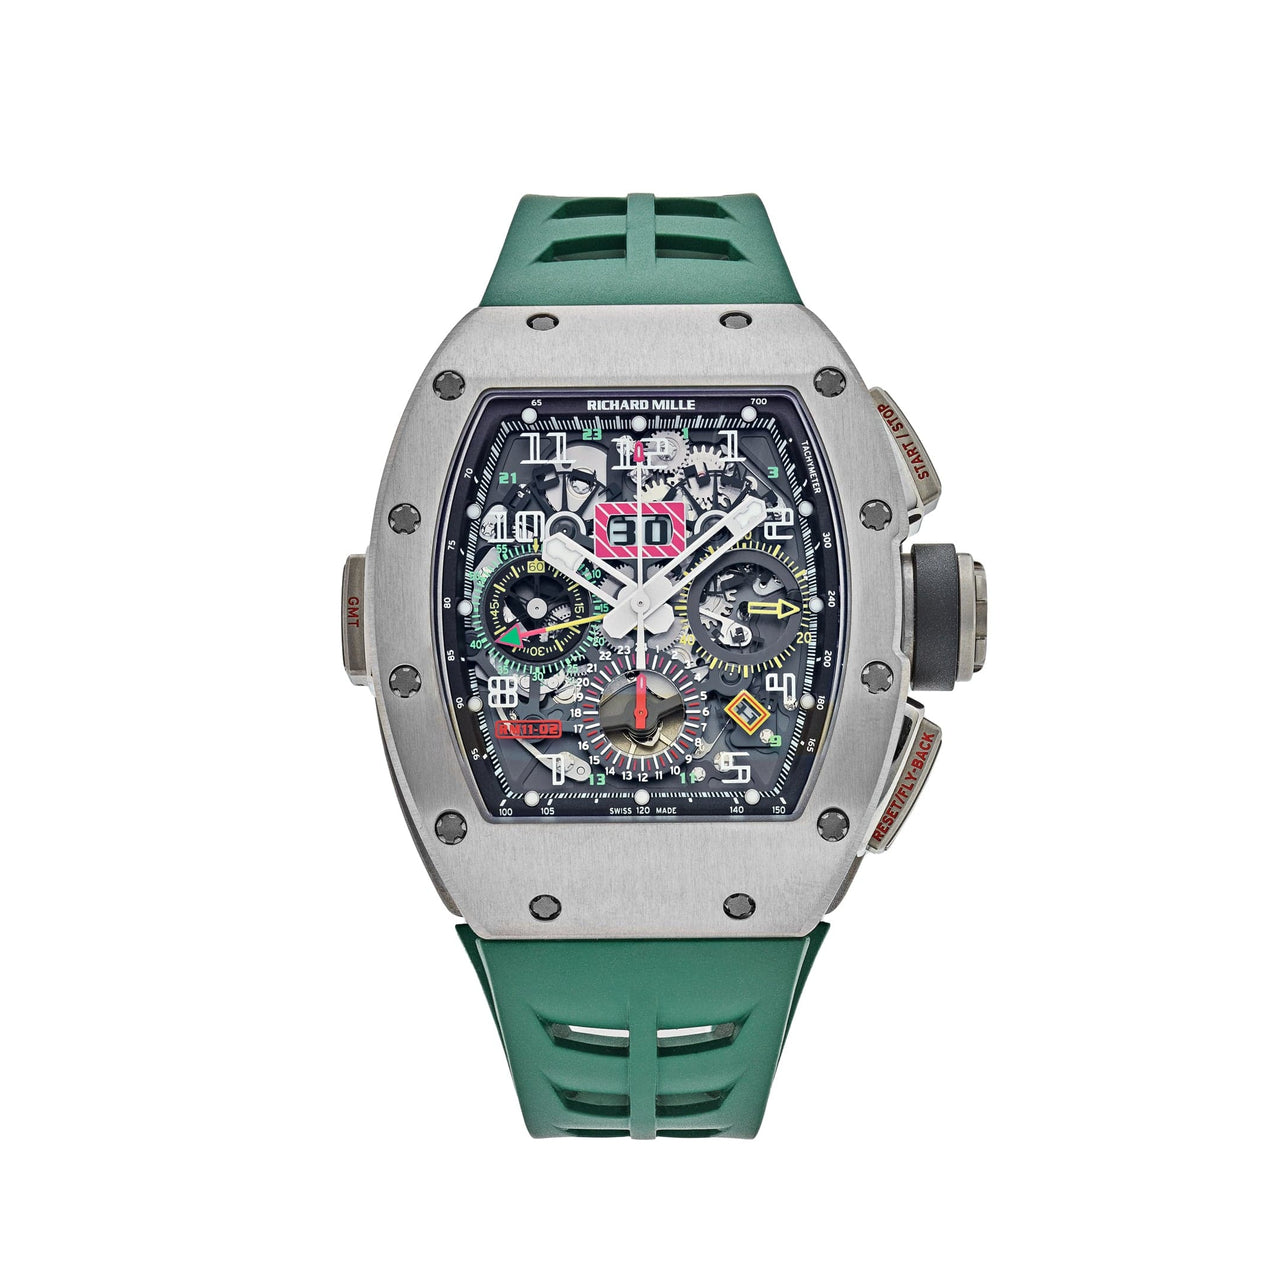 Richard Mille RM 11-02 Titanium Flyback Chronograph GMT Openworked